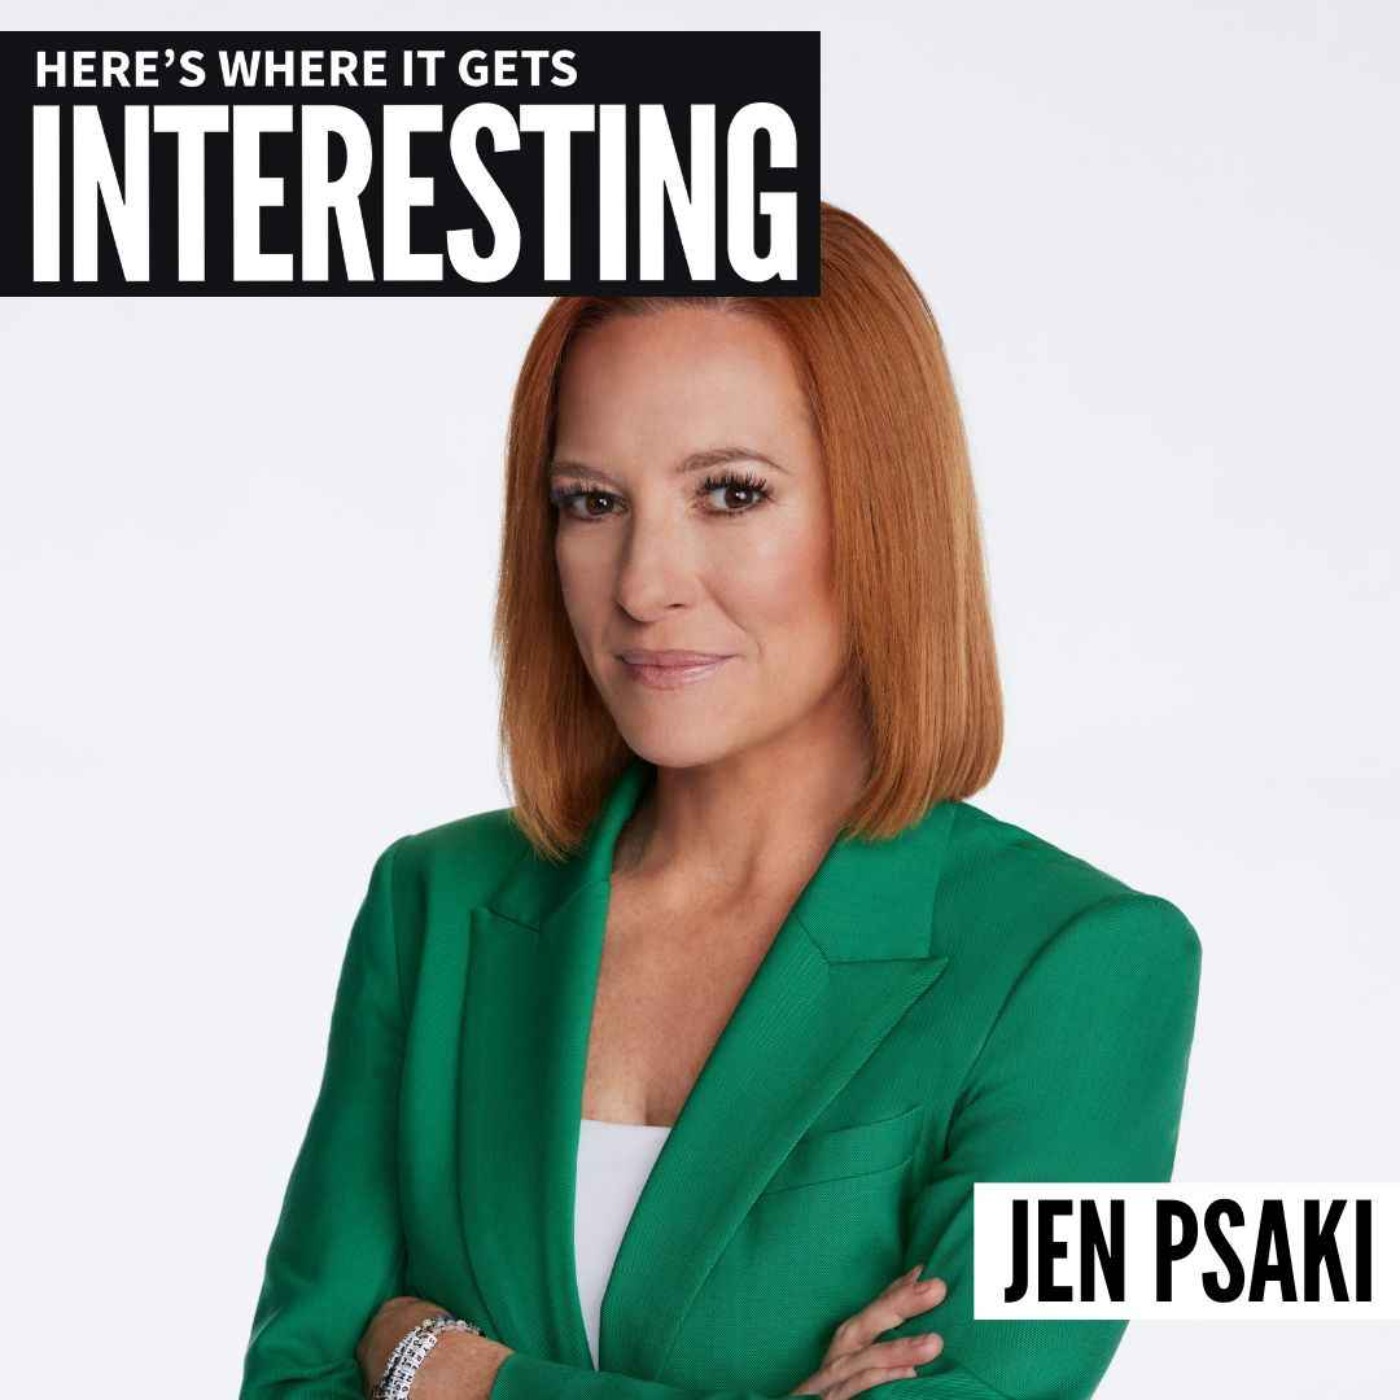 Say More with Jen Psaki